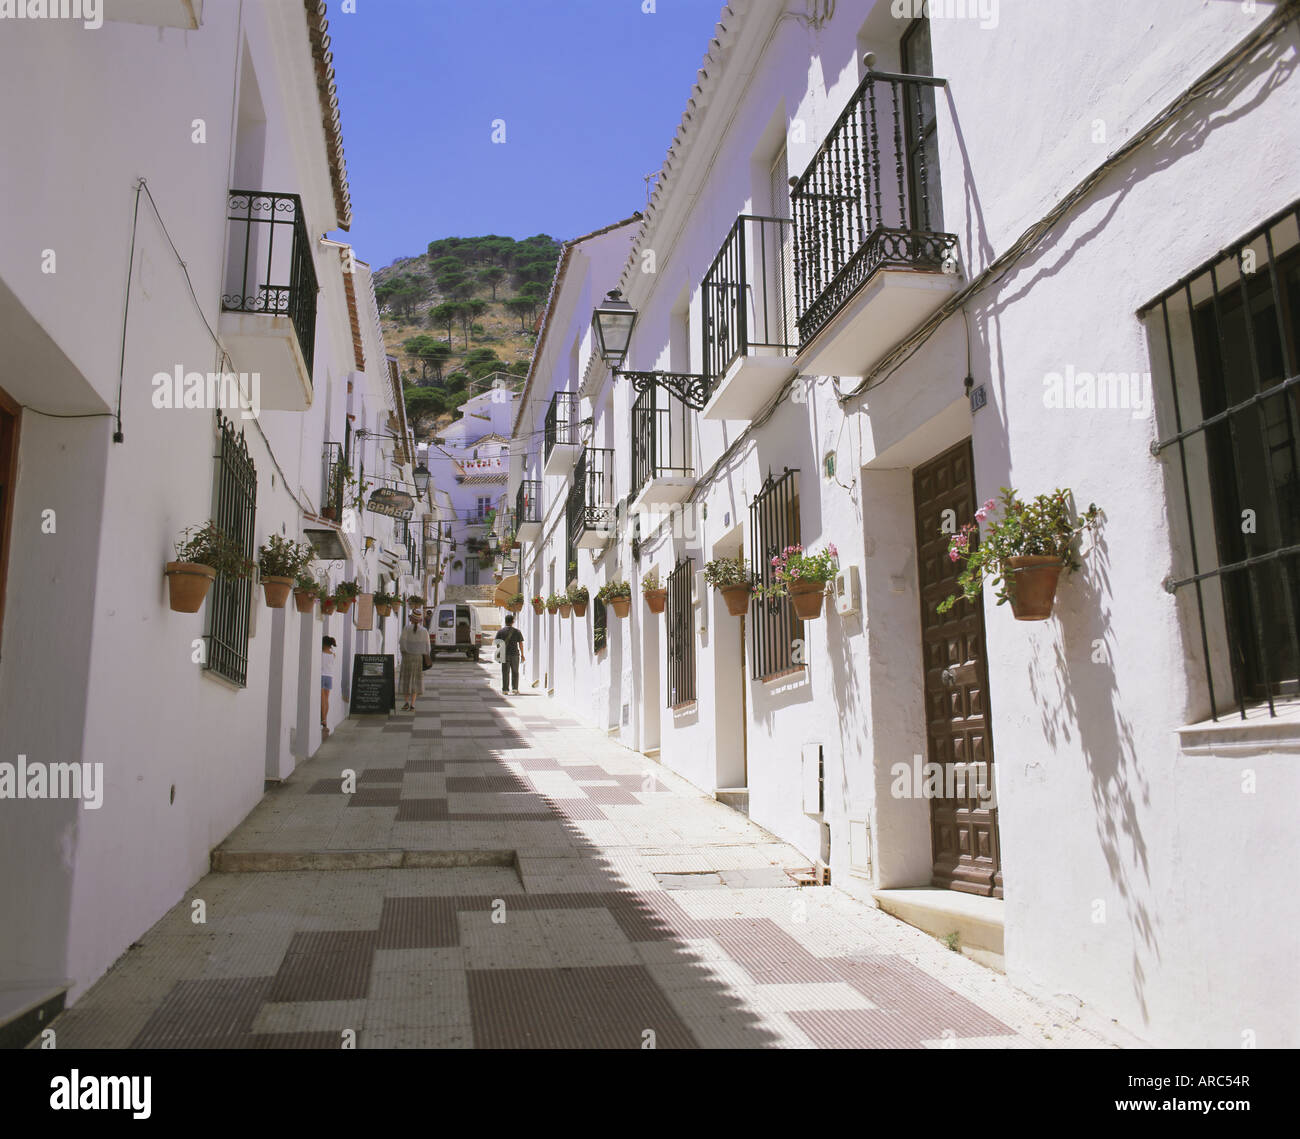 Street in the white hill village of Mijas, Costa del Sol, Andalucia (Andalusia), Spain, Europe Stock Photo